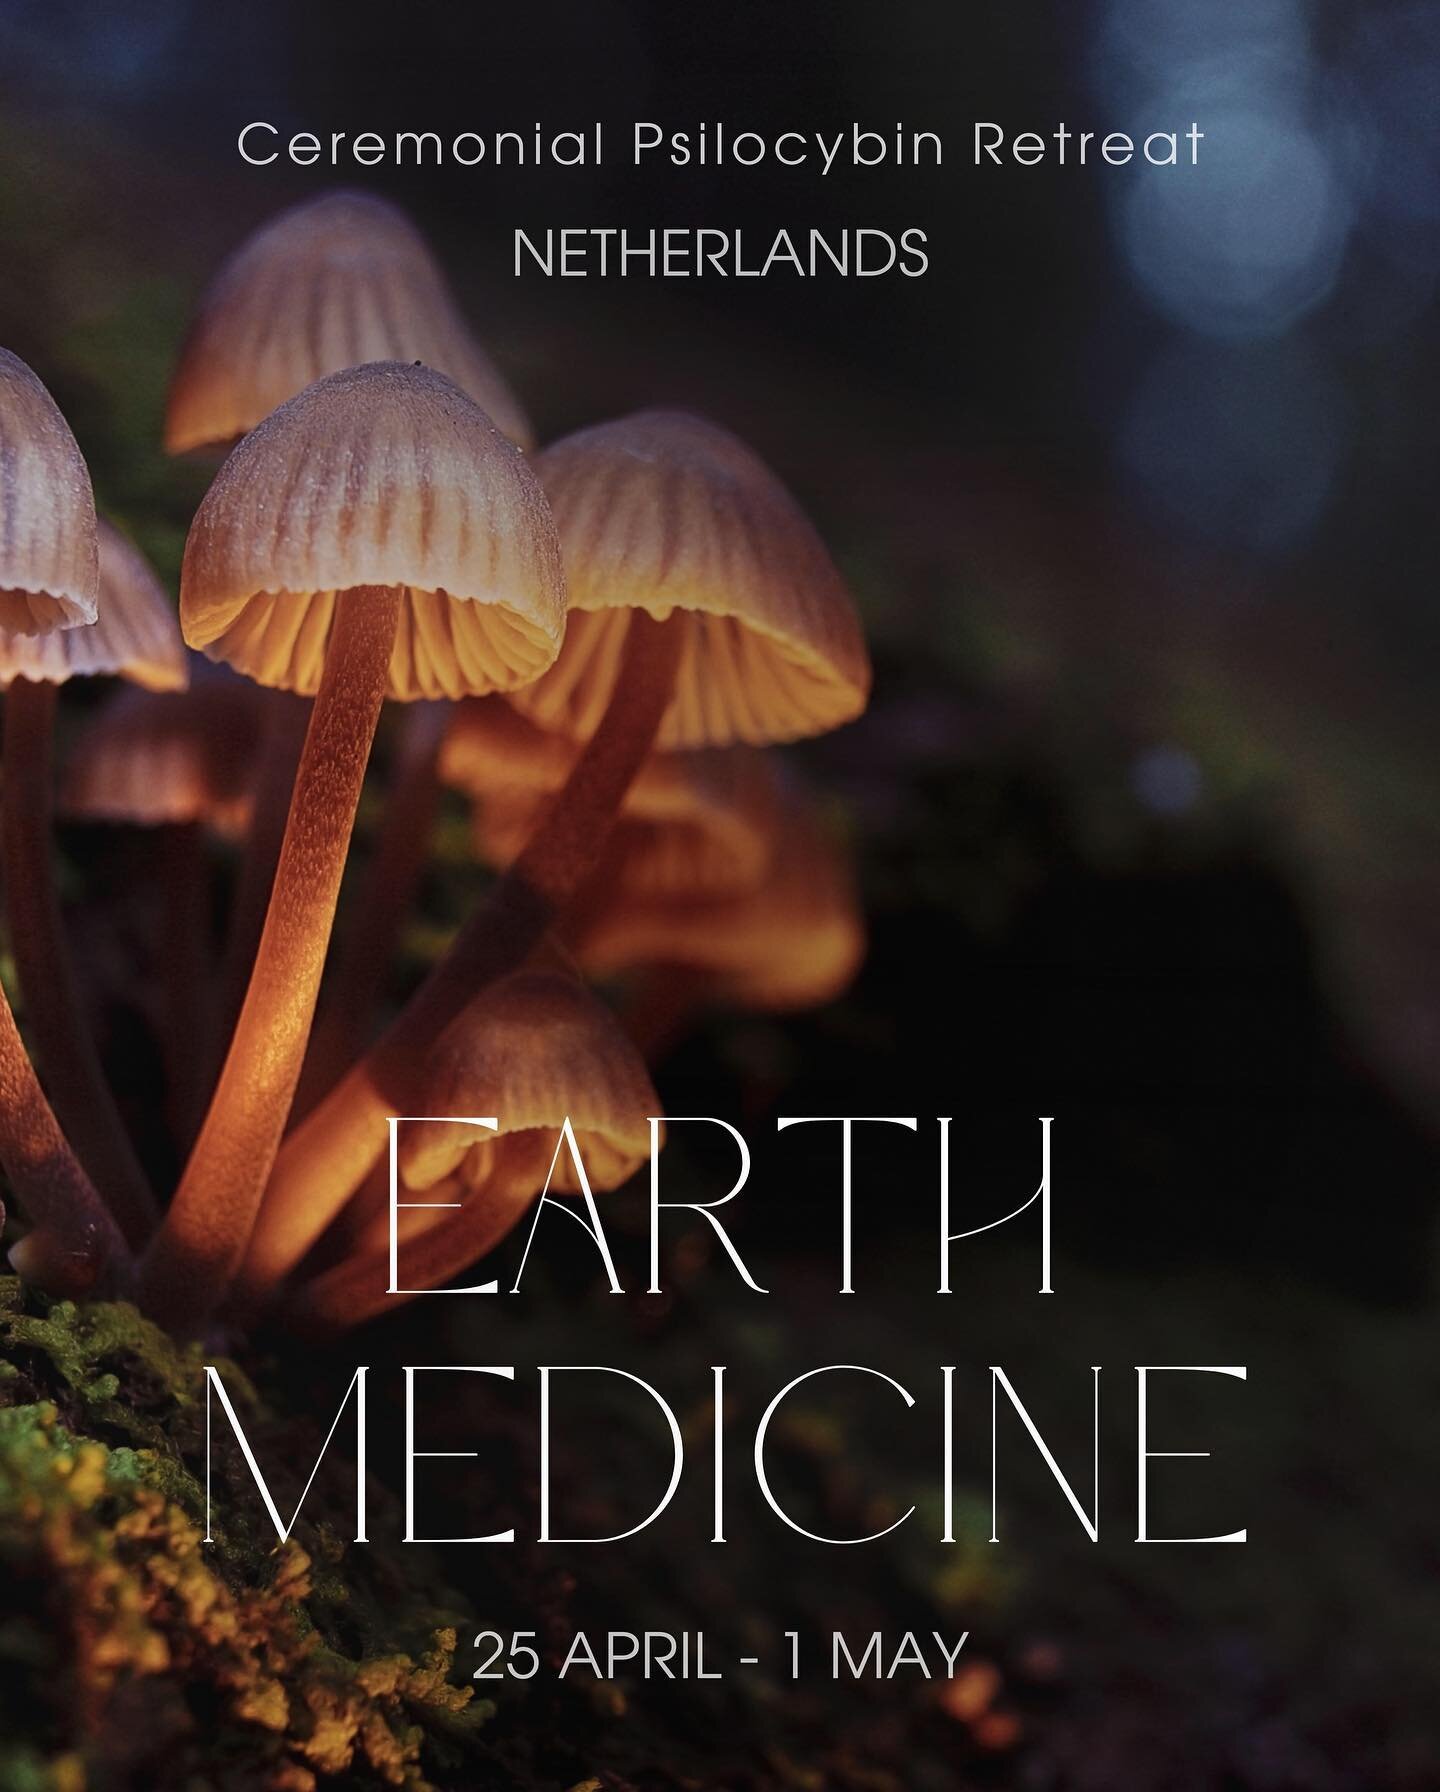 EARTH MEDICINE🌿

A ceremonial Psilocybin retreat to ignite self-healing, awe + interconnectivity

Join us in the expansive, liminal Netherlands

🌱 25th April - 1st May 🌱

This is a process of emerging, surrendering and re-membering&hellip; where y